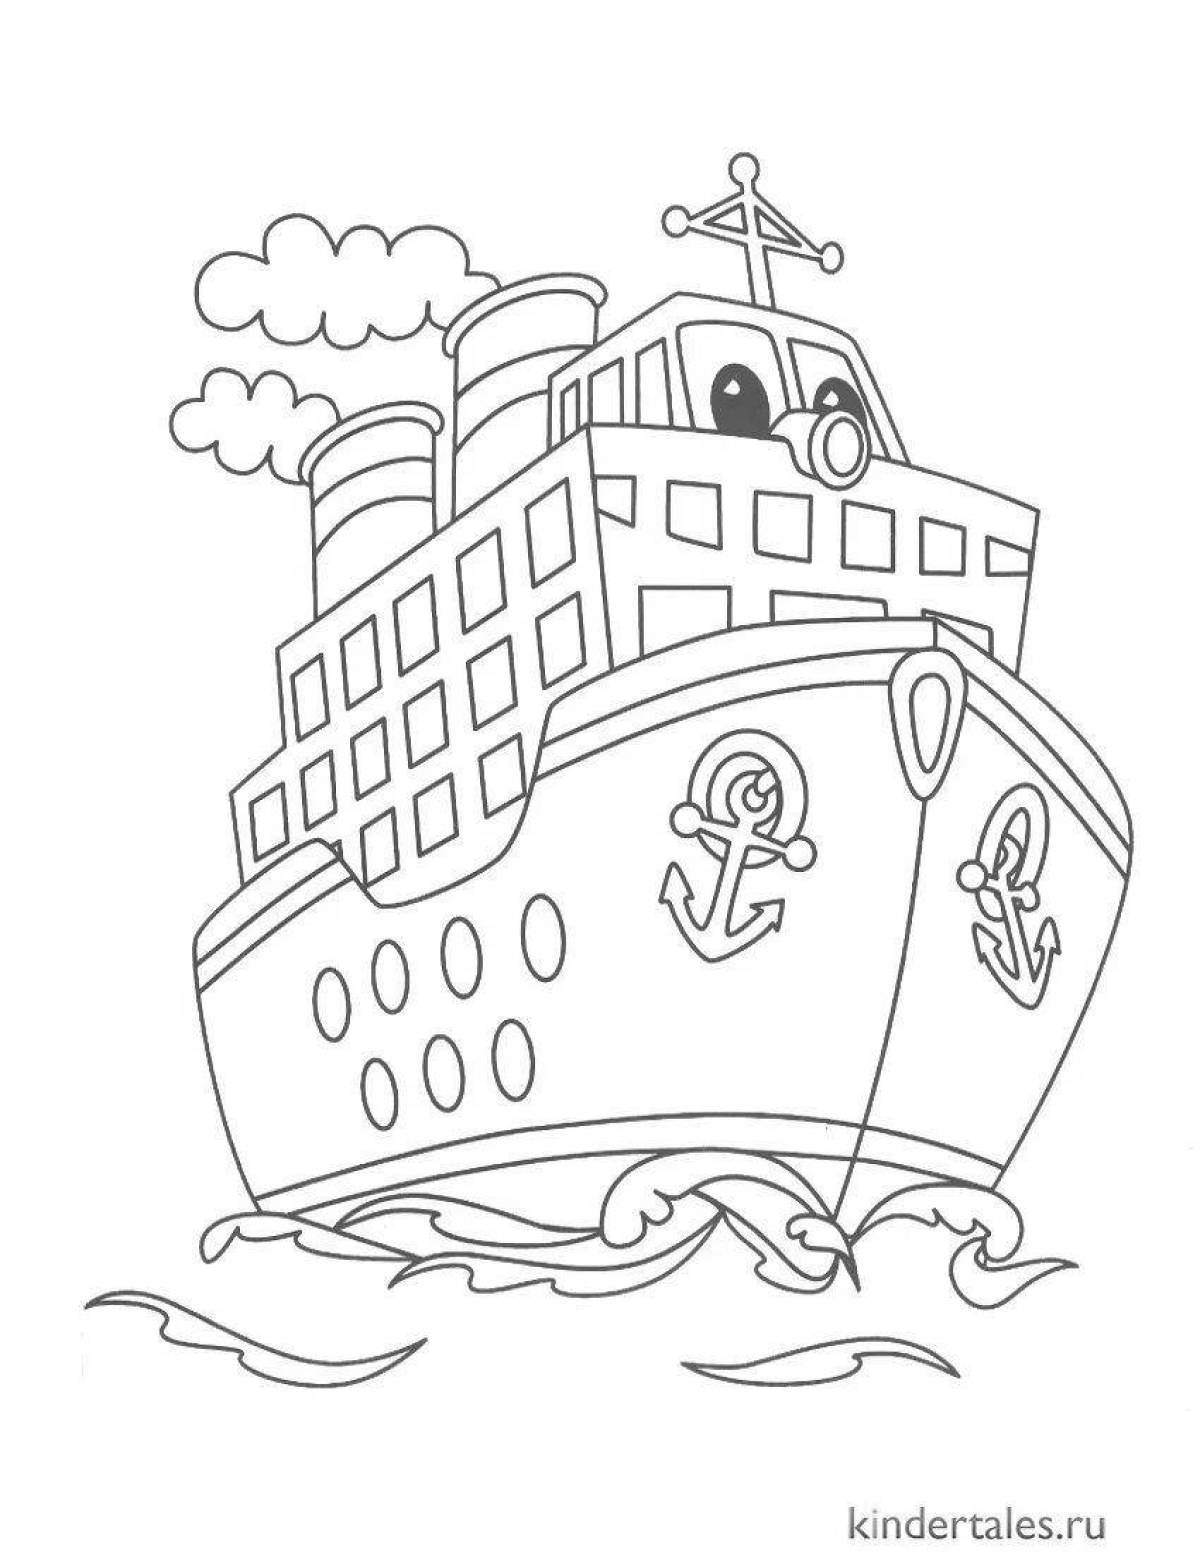 Colorful steamship coloring page